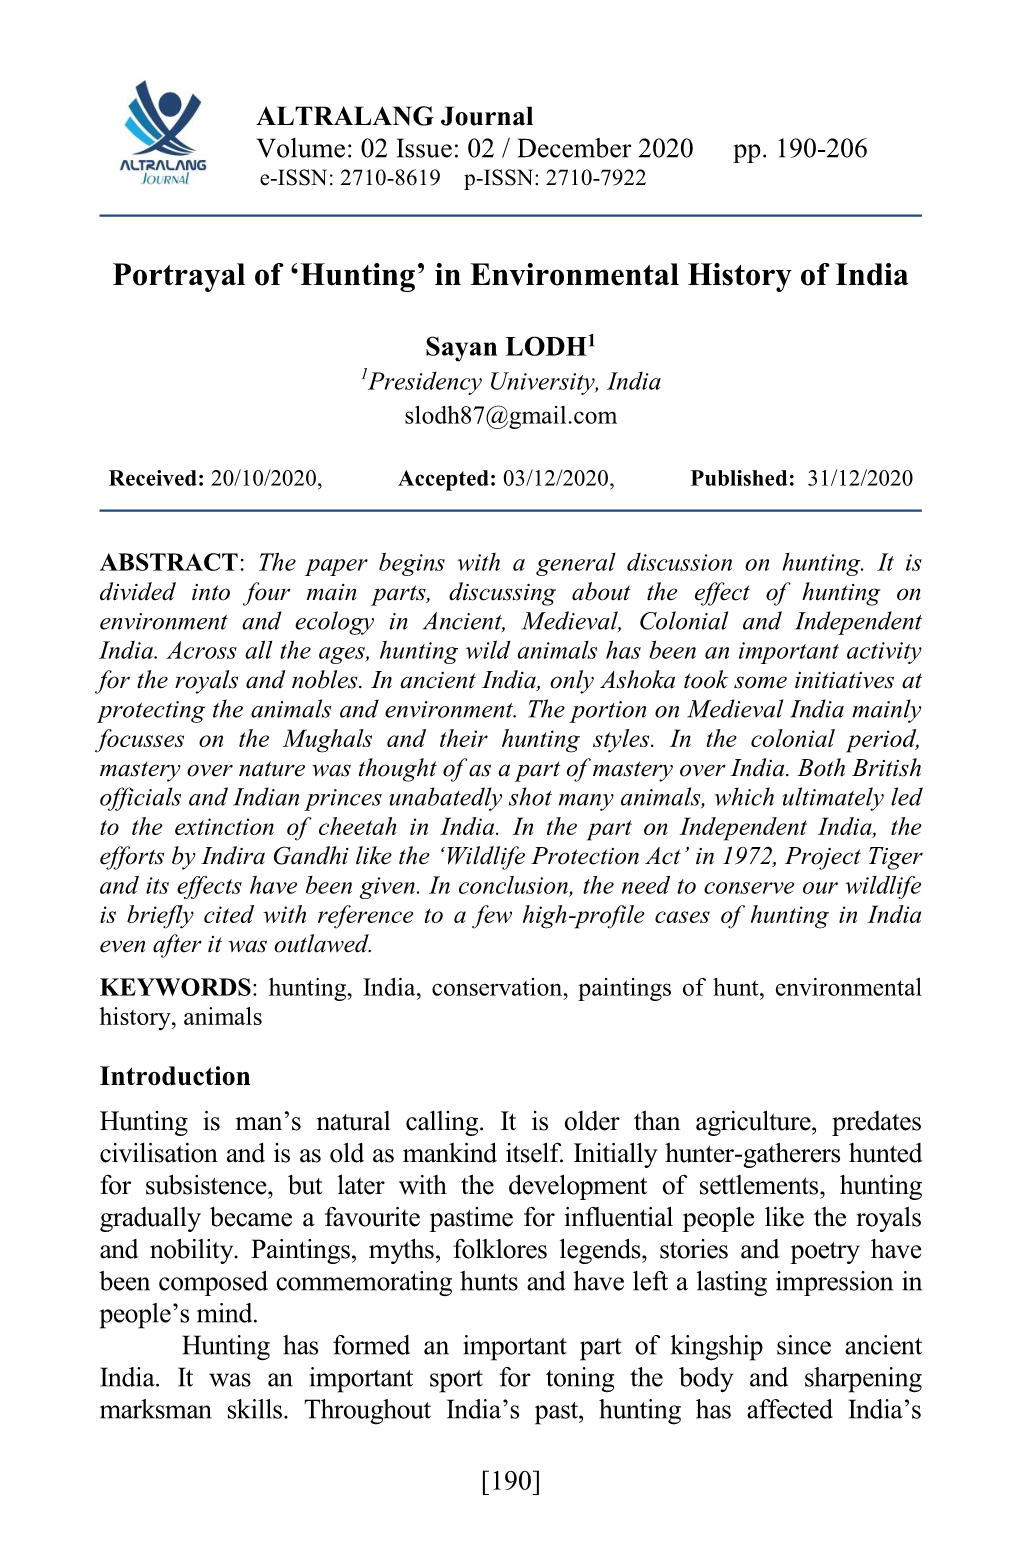 Hunting’ in Environmental History of India